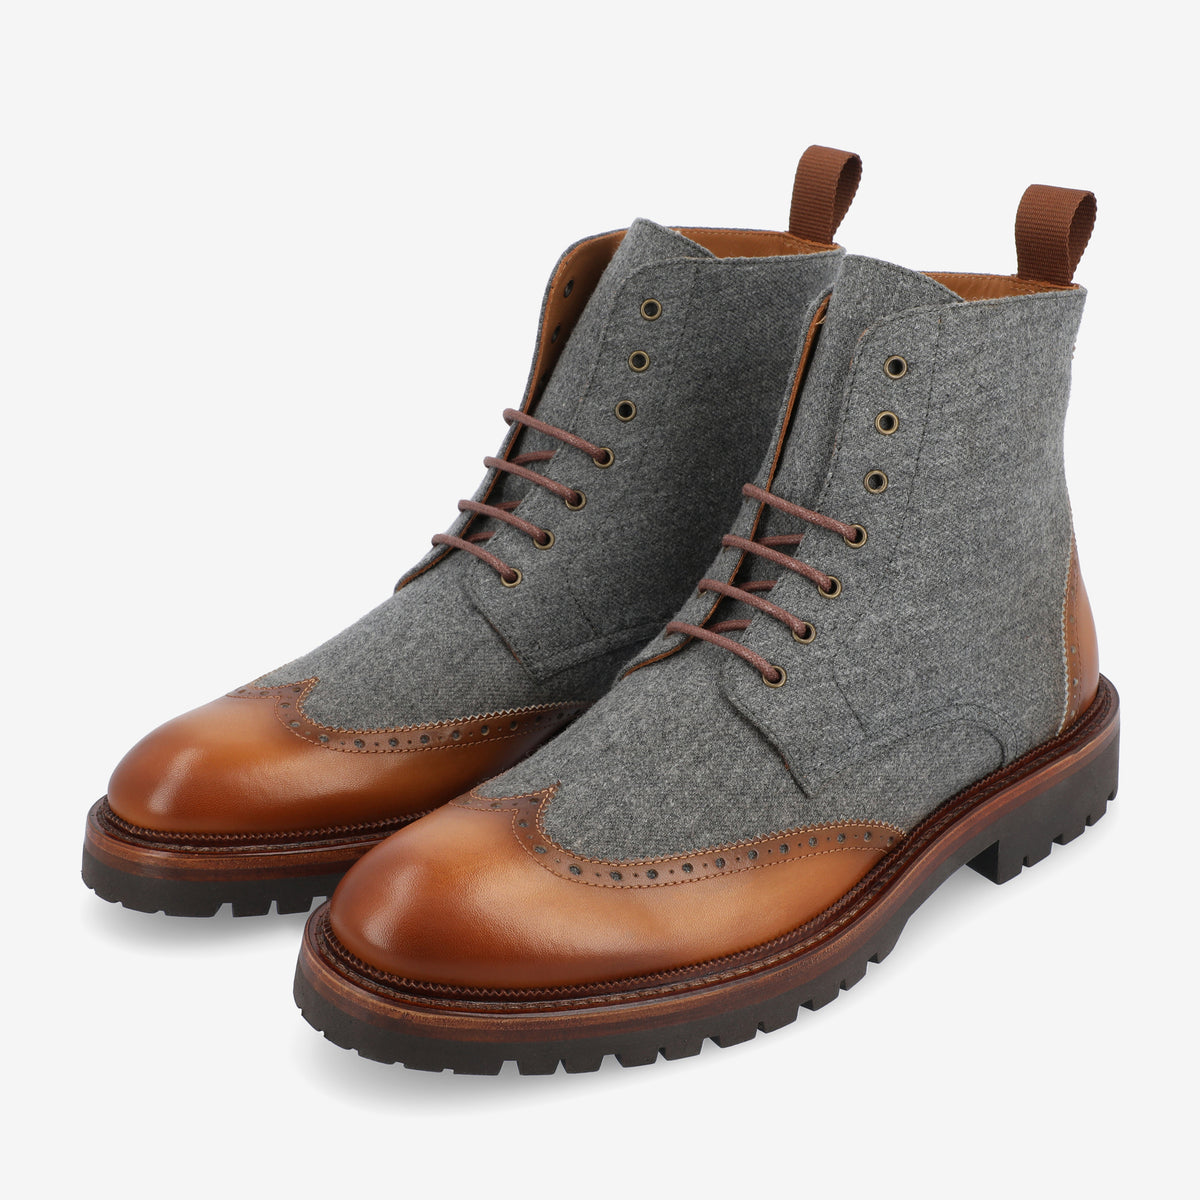 Unique Men's Ankle Boots in Leather & Suede | TAFT